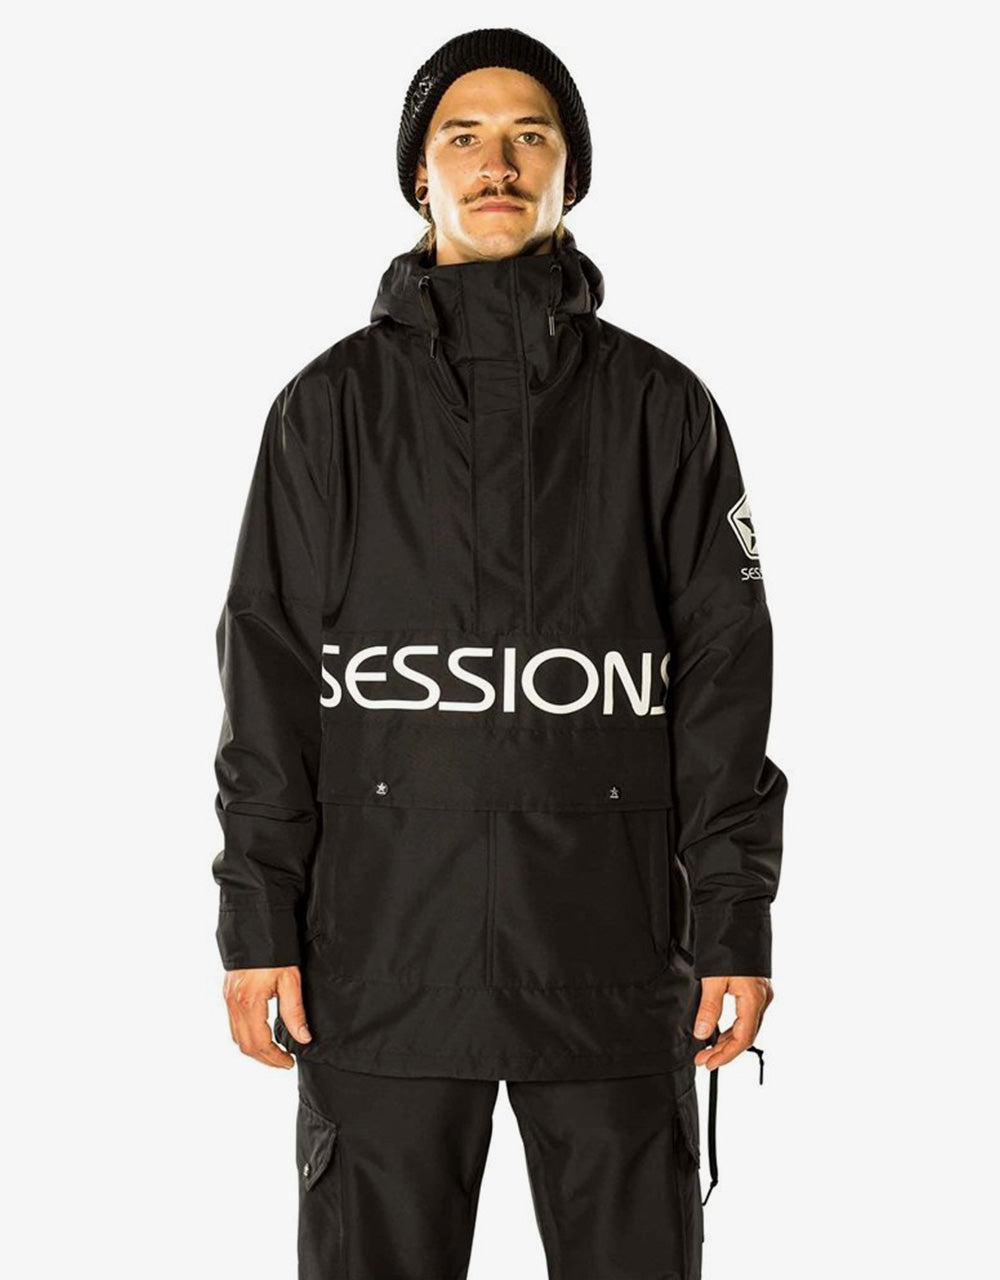 Sessions Chaos Pullover Snowboard Jacket - Black – Route One